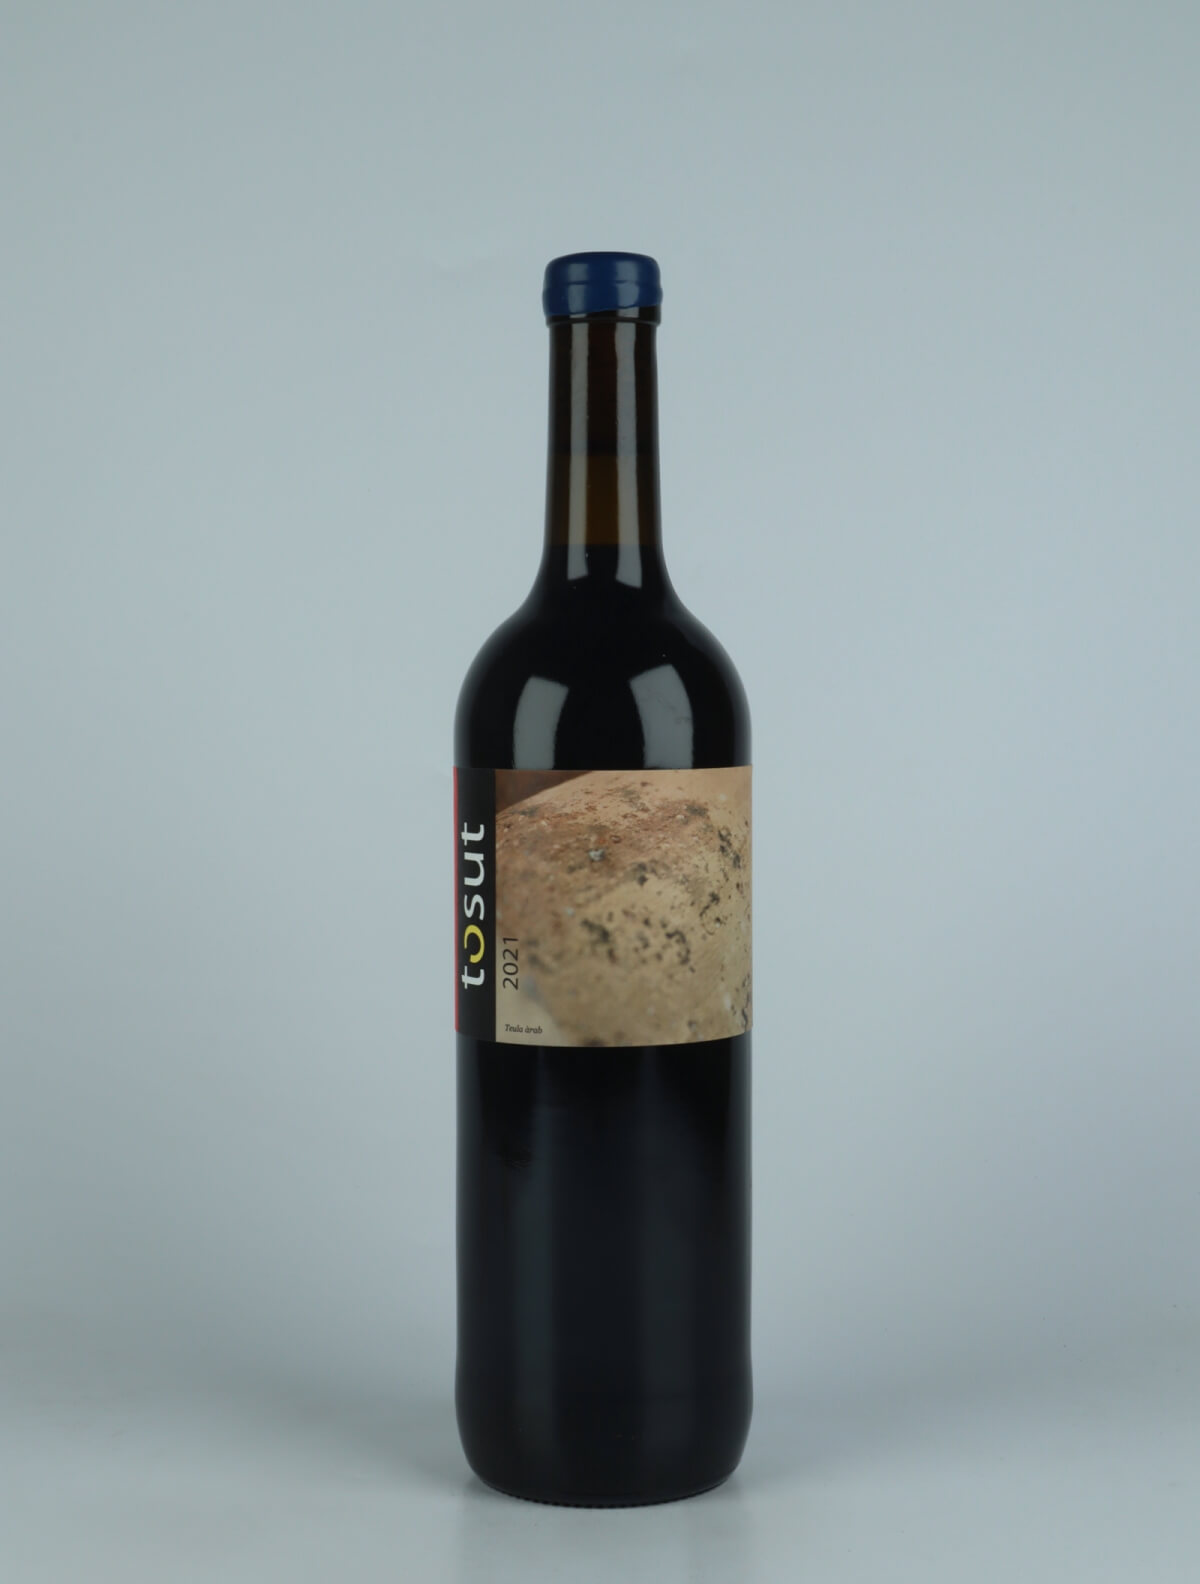 A bottle 2021 Tosut Red wine from Jordi Llorens, Catalonia in Spain